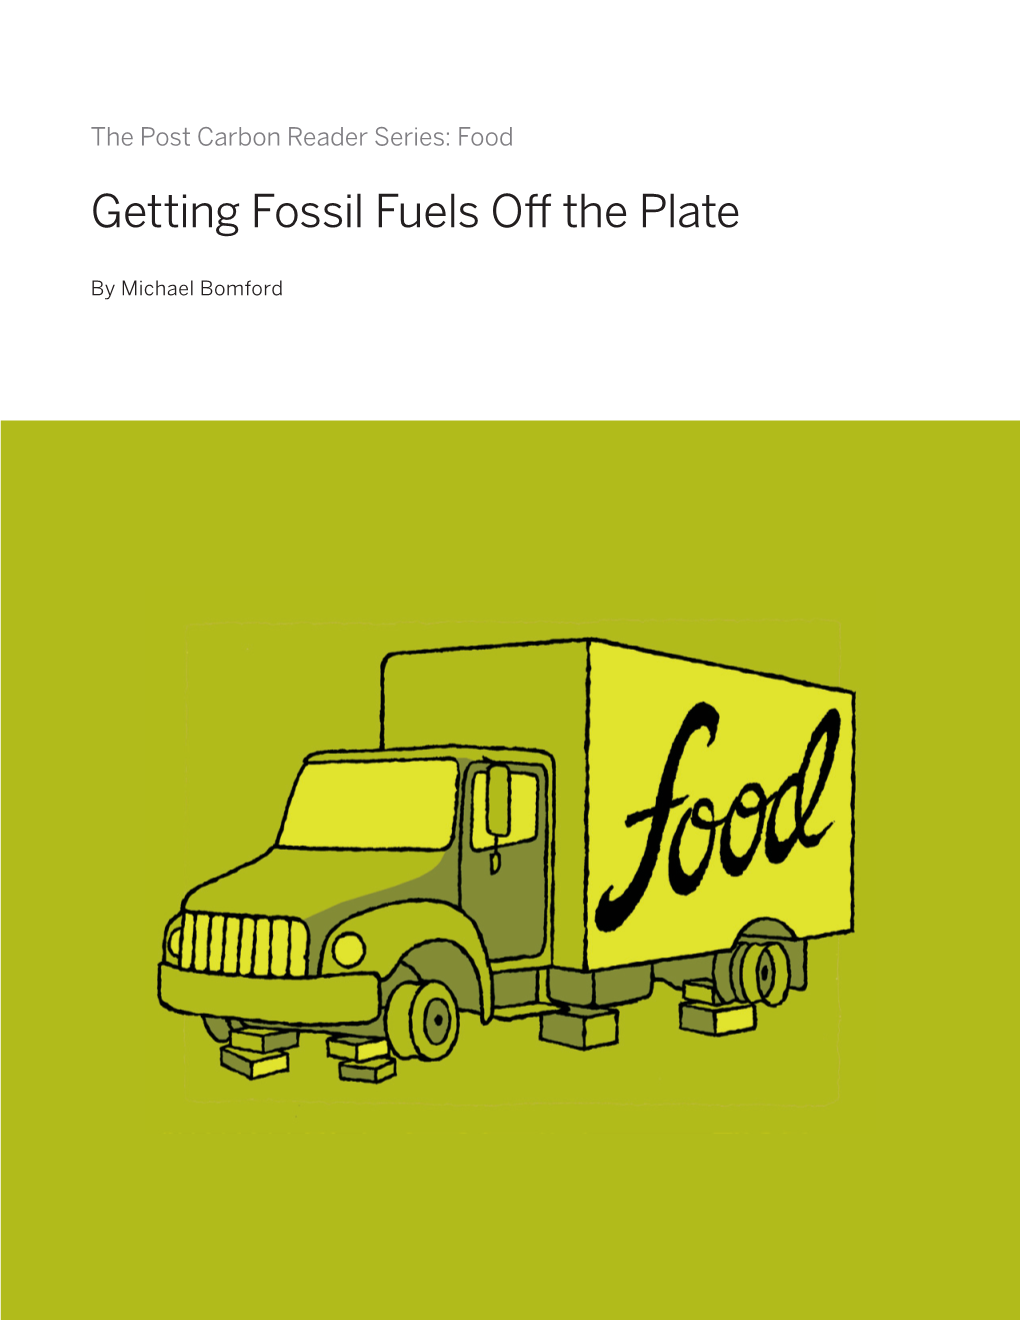 Getting Fossil Fuels Off the Plate